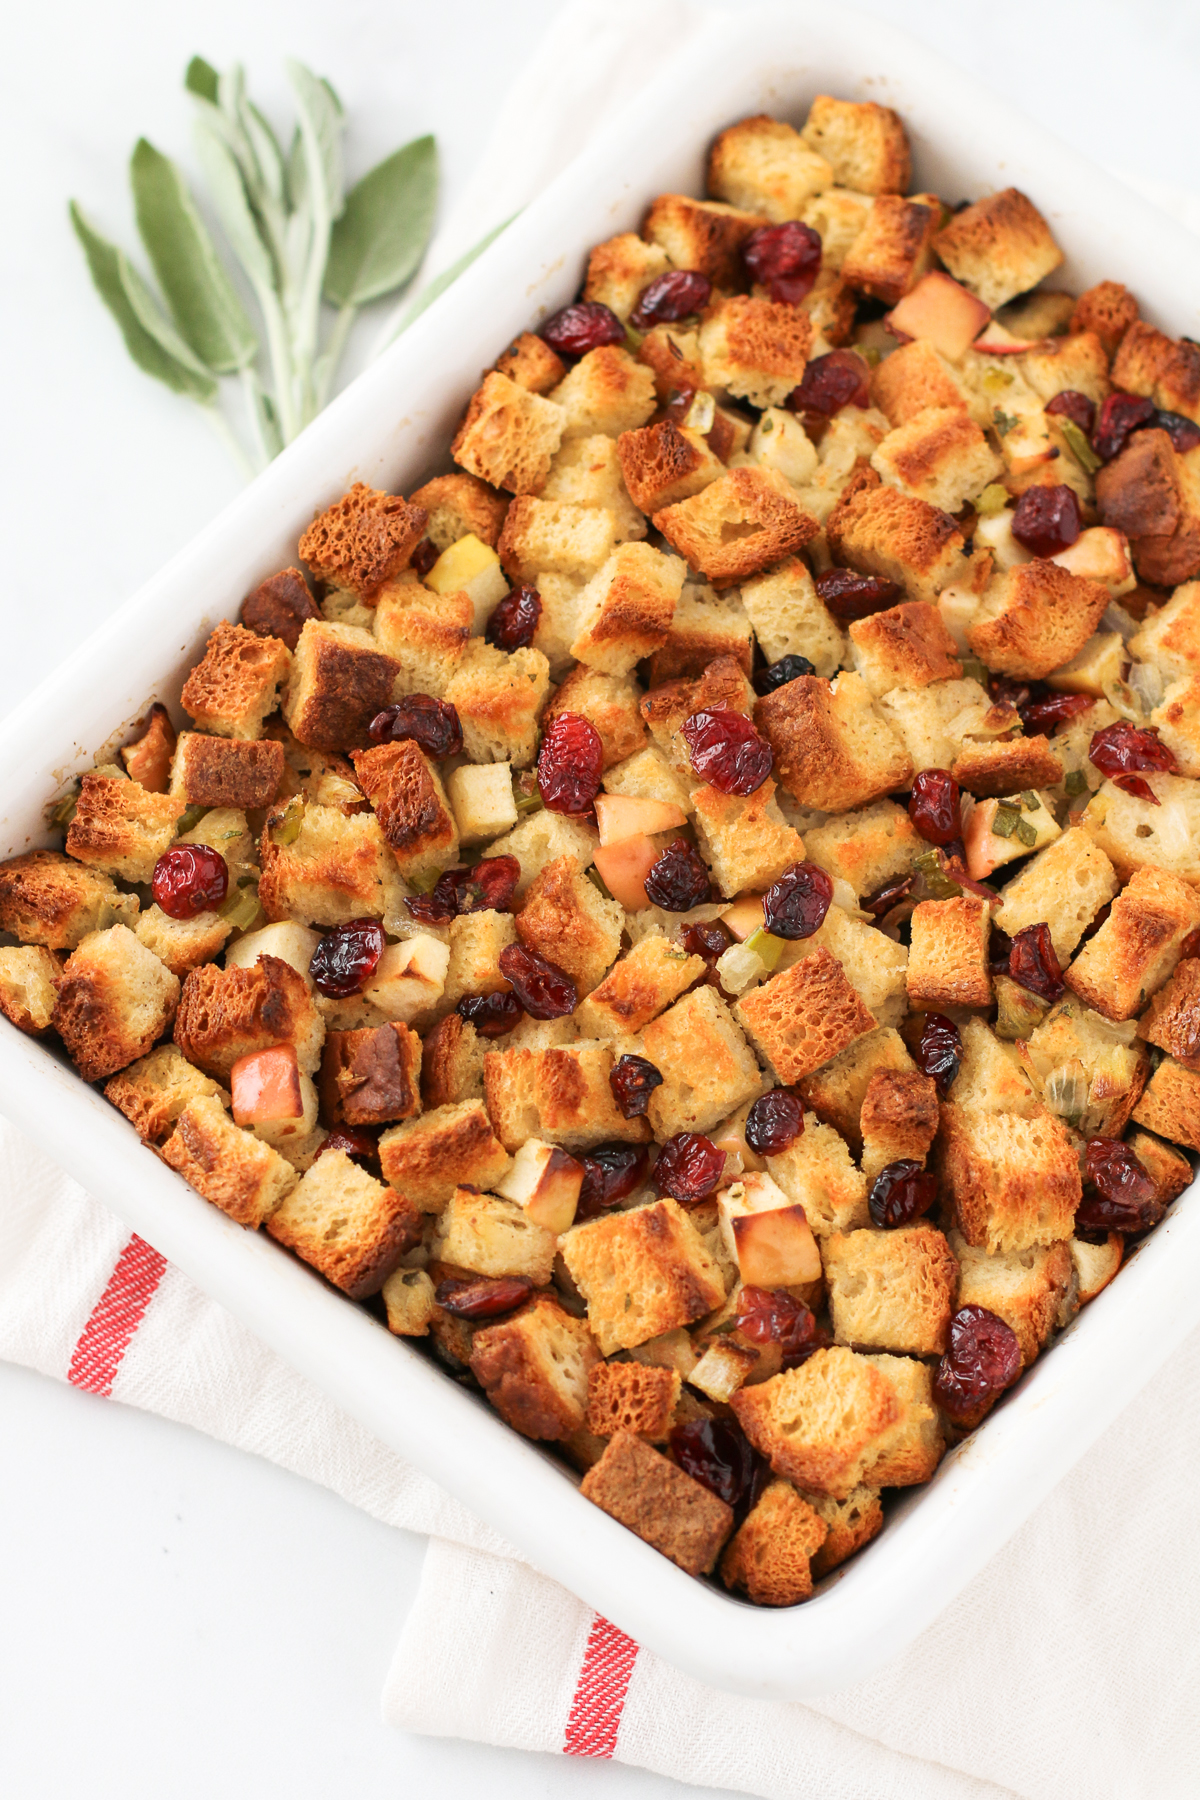 Gluten Free Apple Cranberry Stuffing. The sweet and savory combination of flavors in this stuffing makes it so satisfying and delicious.